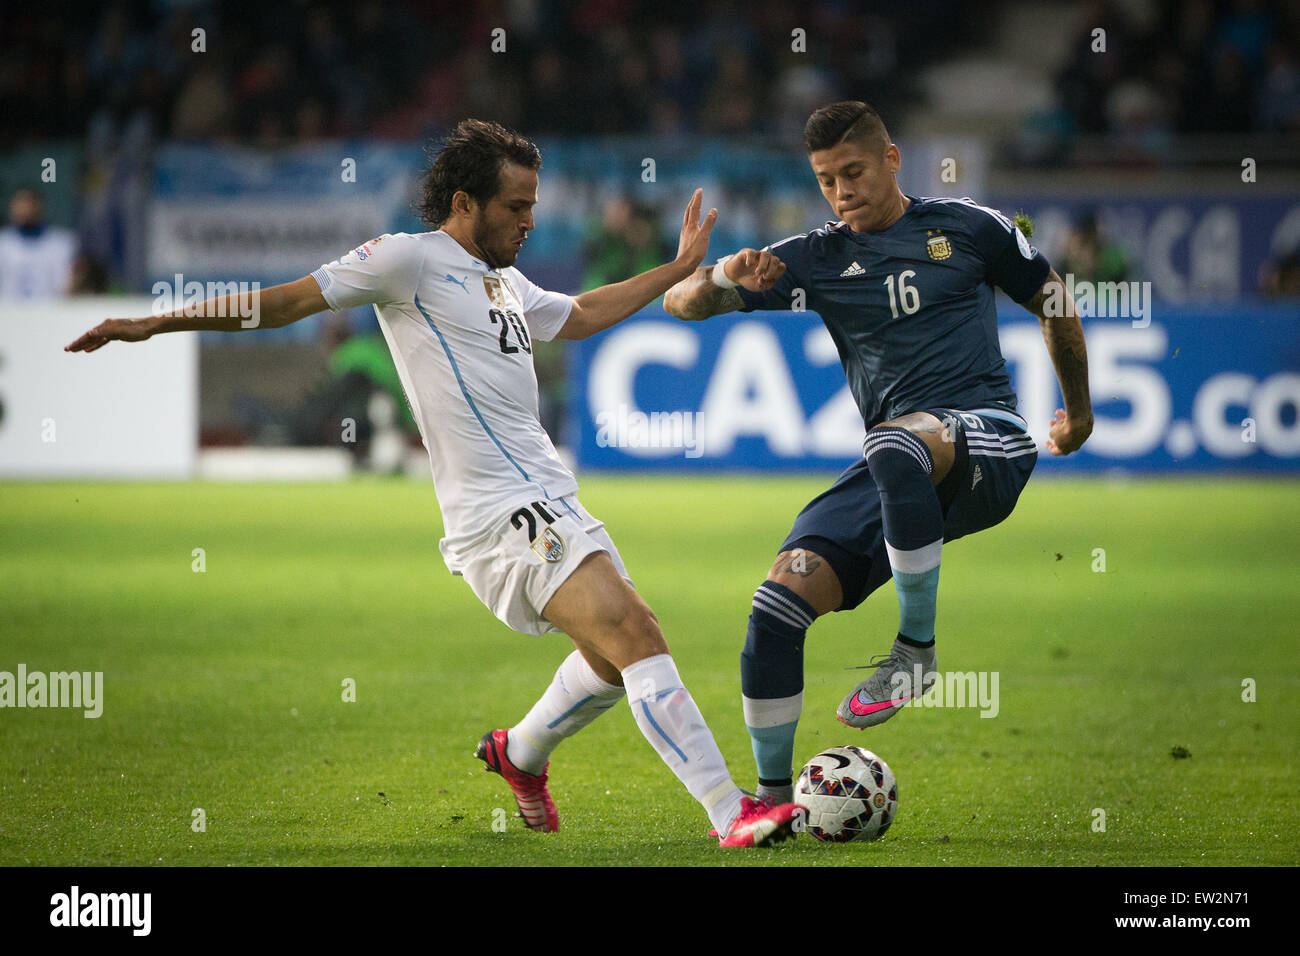 La Serena, Chile. 16th June, 2015. Marcos Rojo (R) of Argentina vies with Alvaro Gonzalez of Uruguay during their Group B match at the 2015 American Cup, at La Portada stadium, in La Serena, Chile, on June 16, 2015. Argentina won 1-0. Credit:  Pedro Mera/Xinhua/Alamy Live News Stock Photo